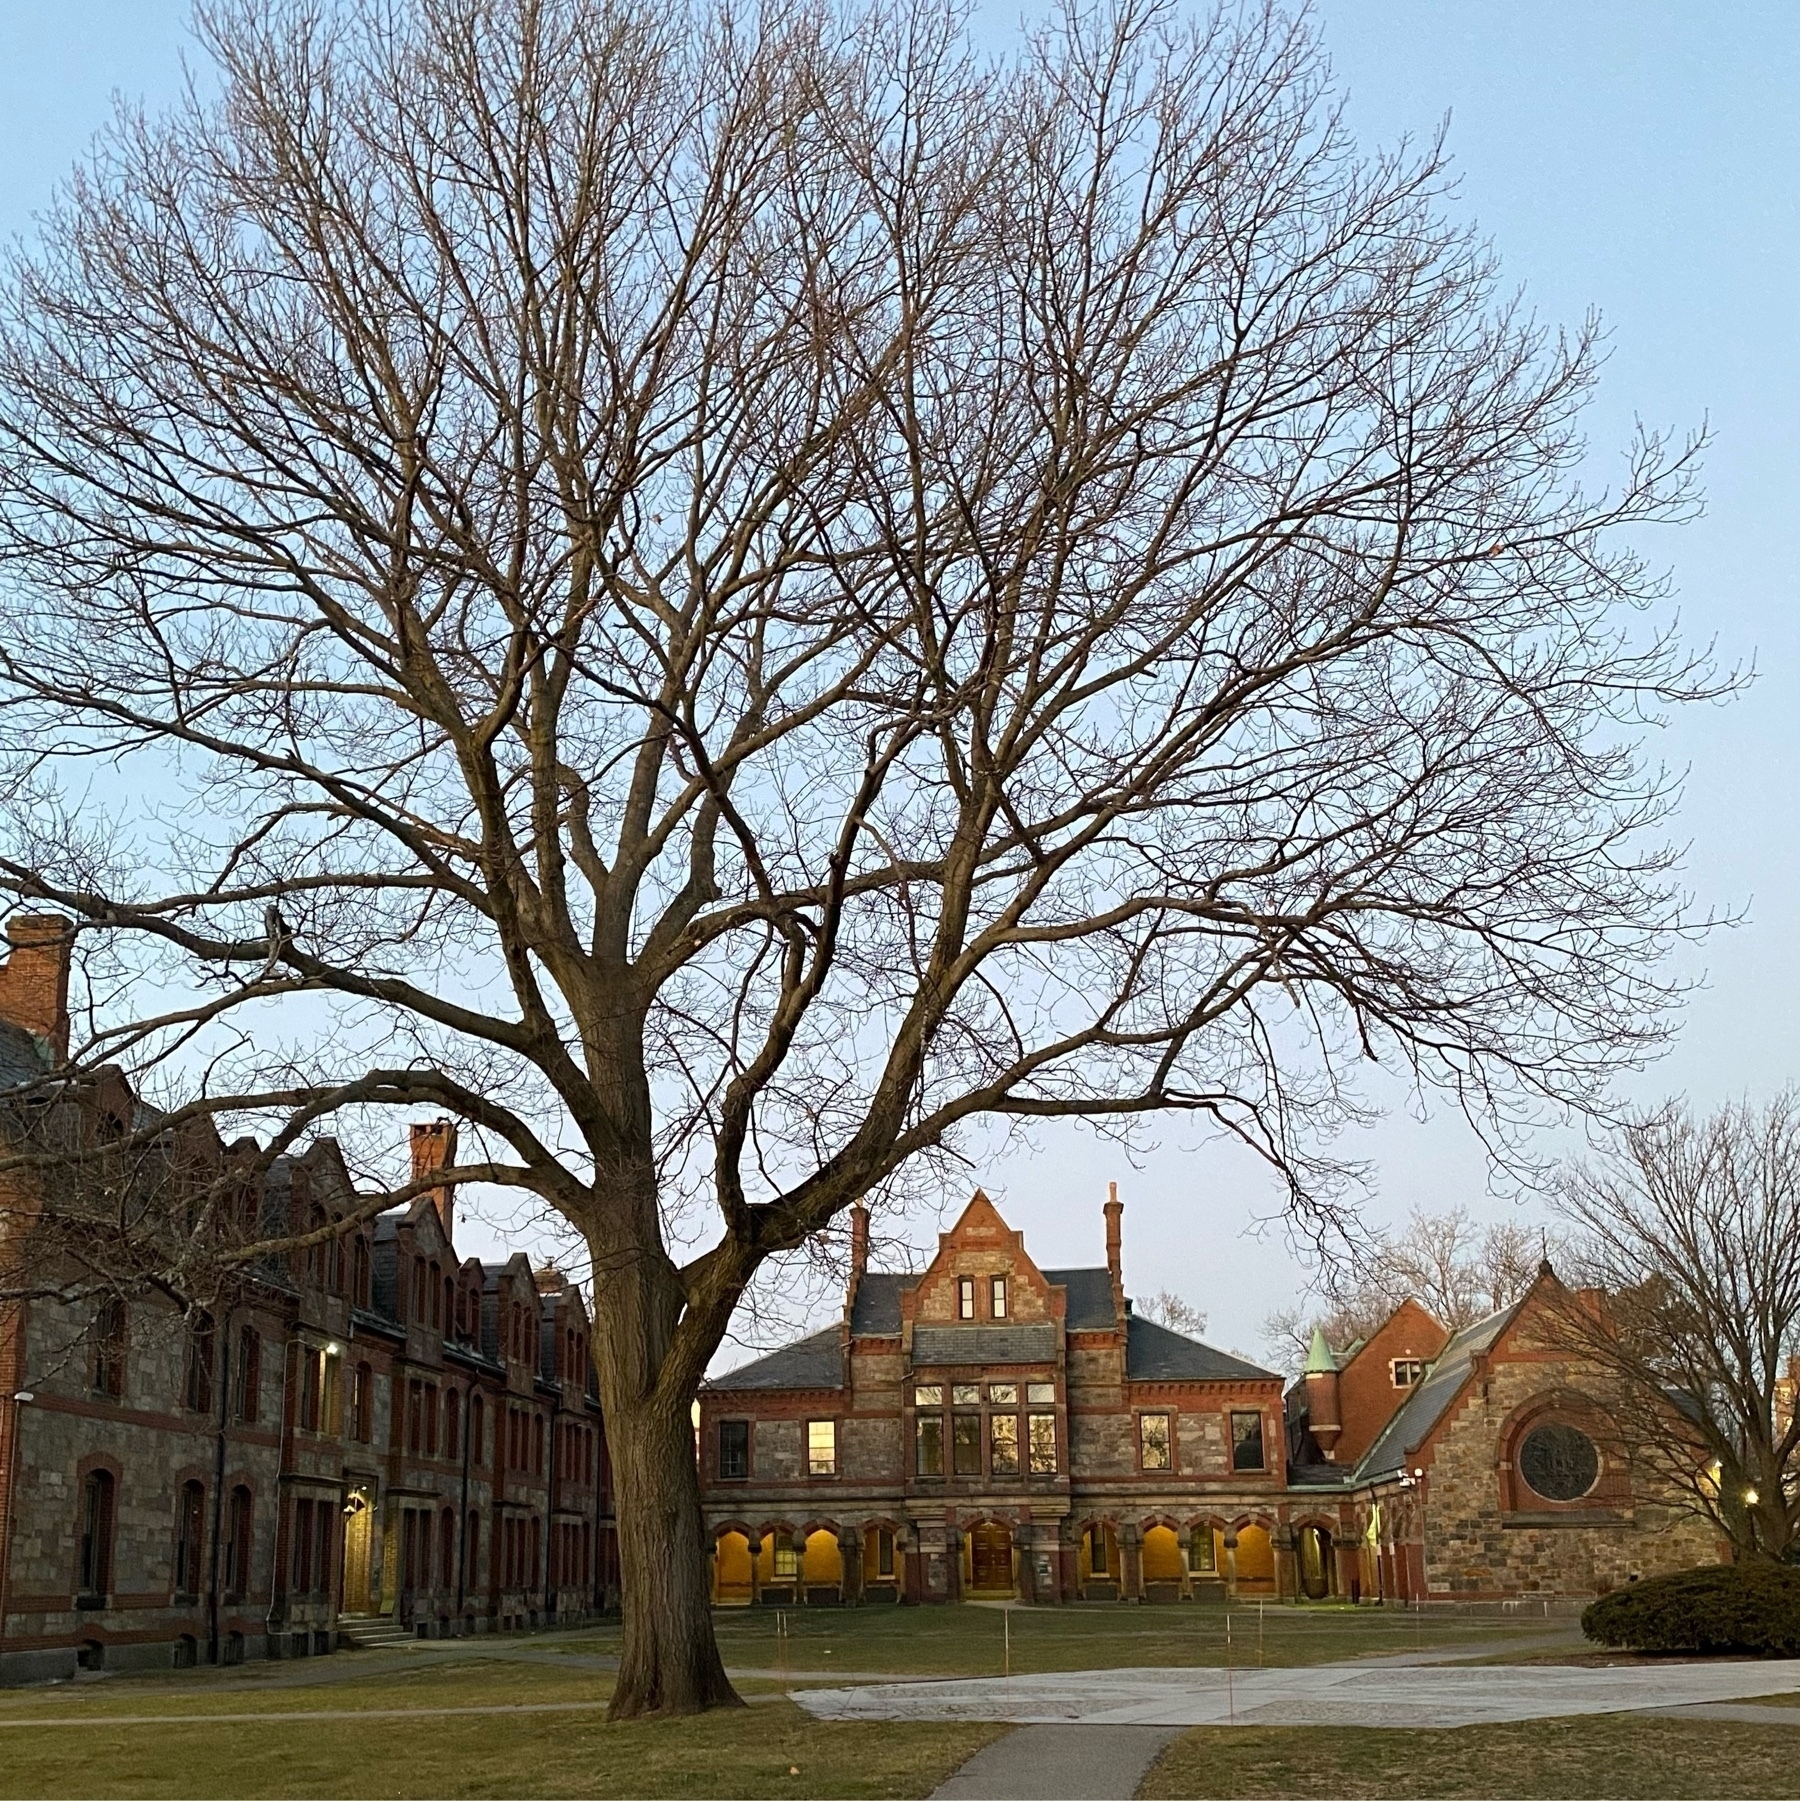 A large bare tree in the yard in front of large stone buildings.